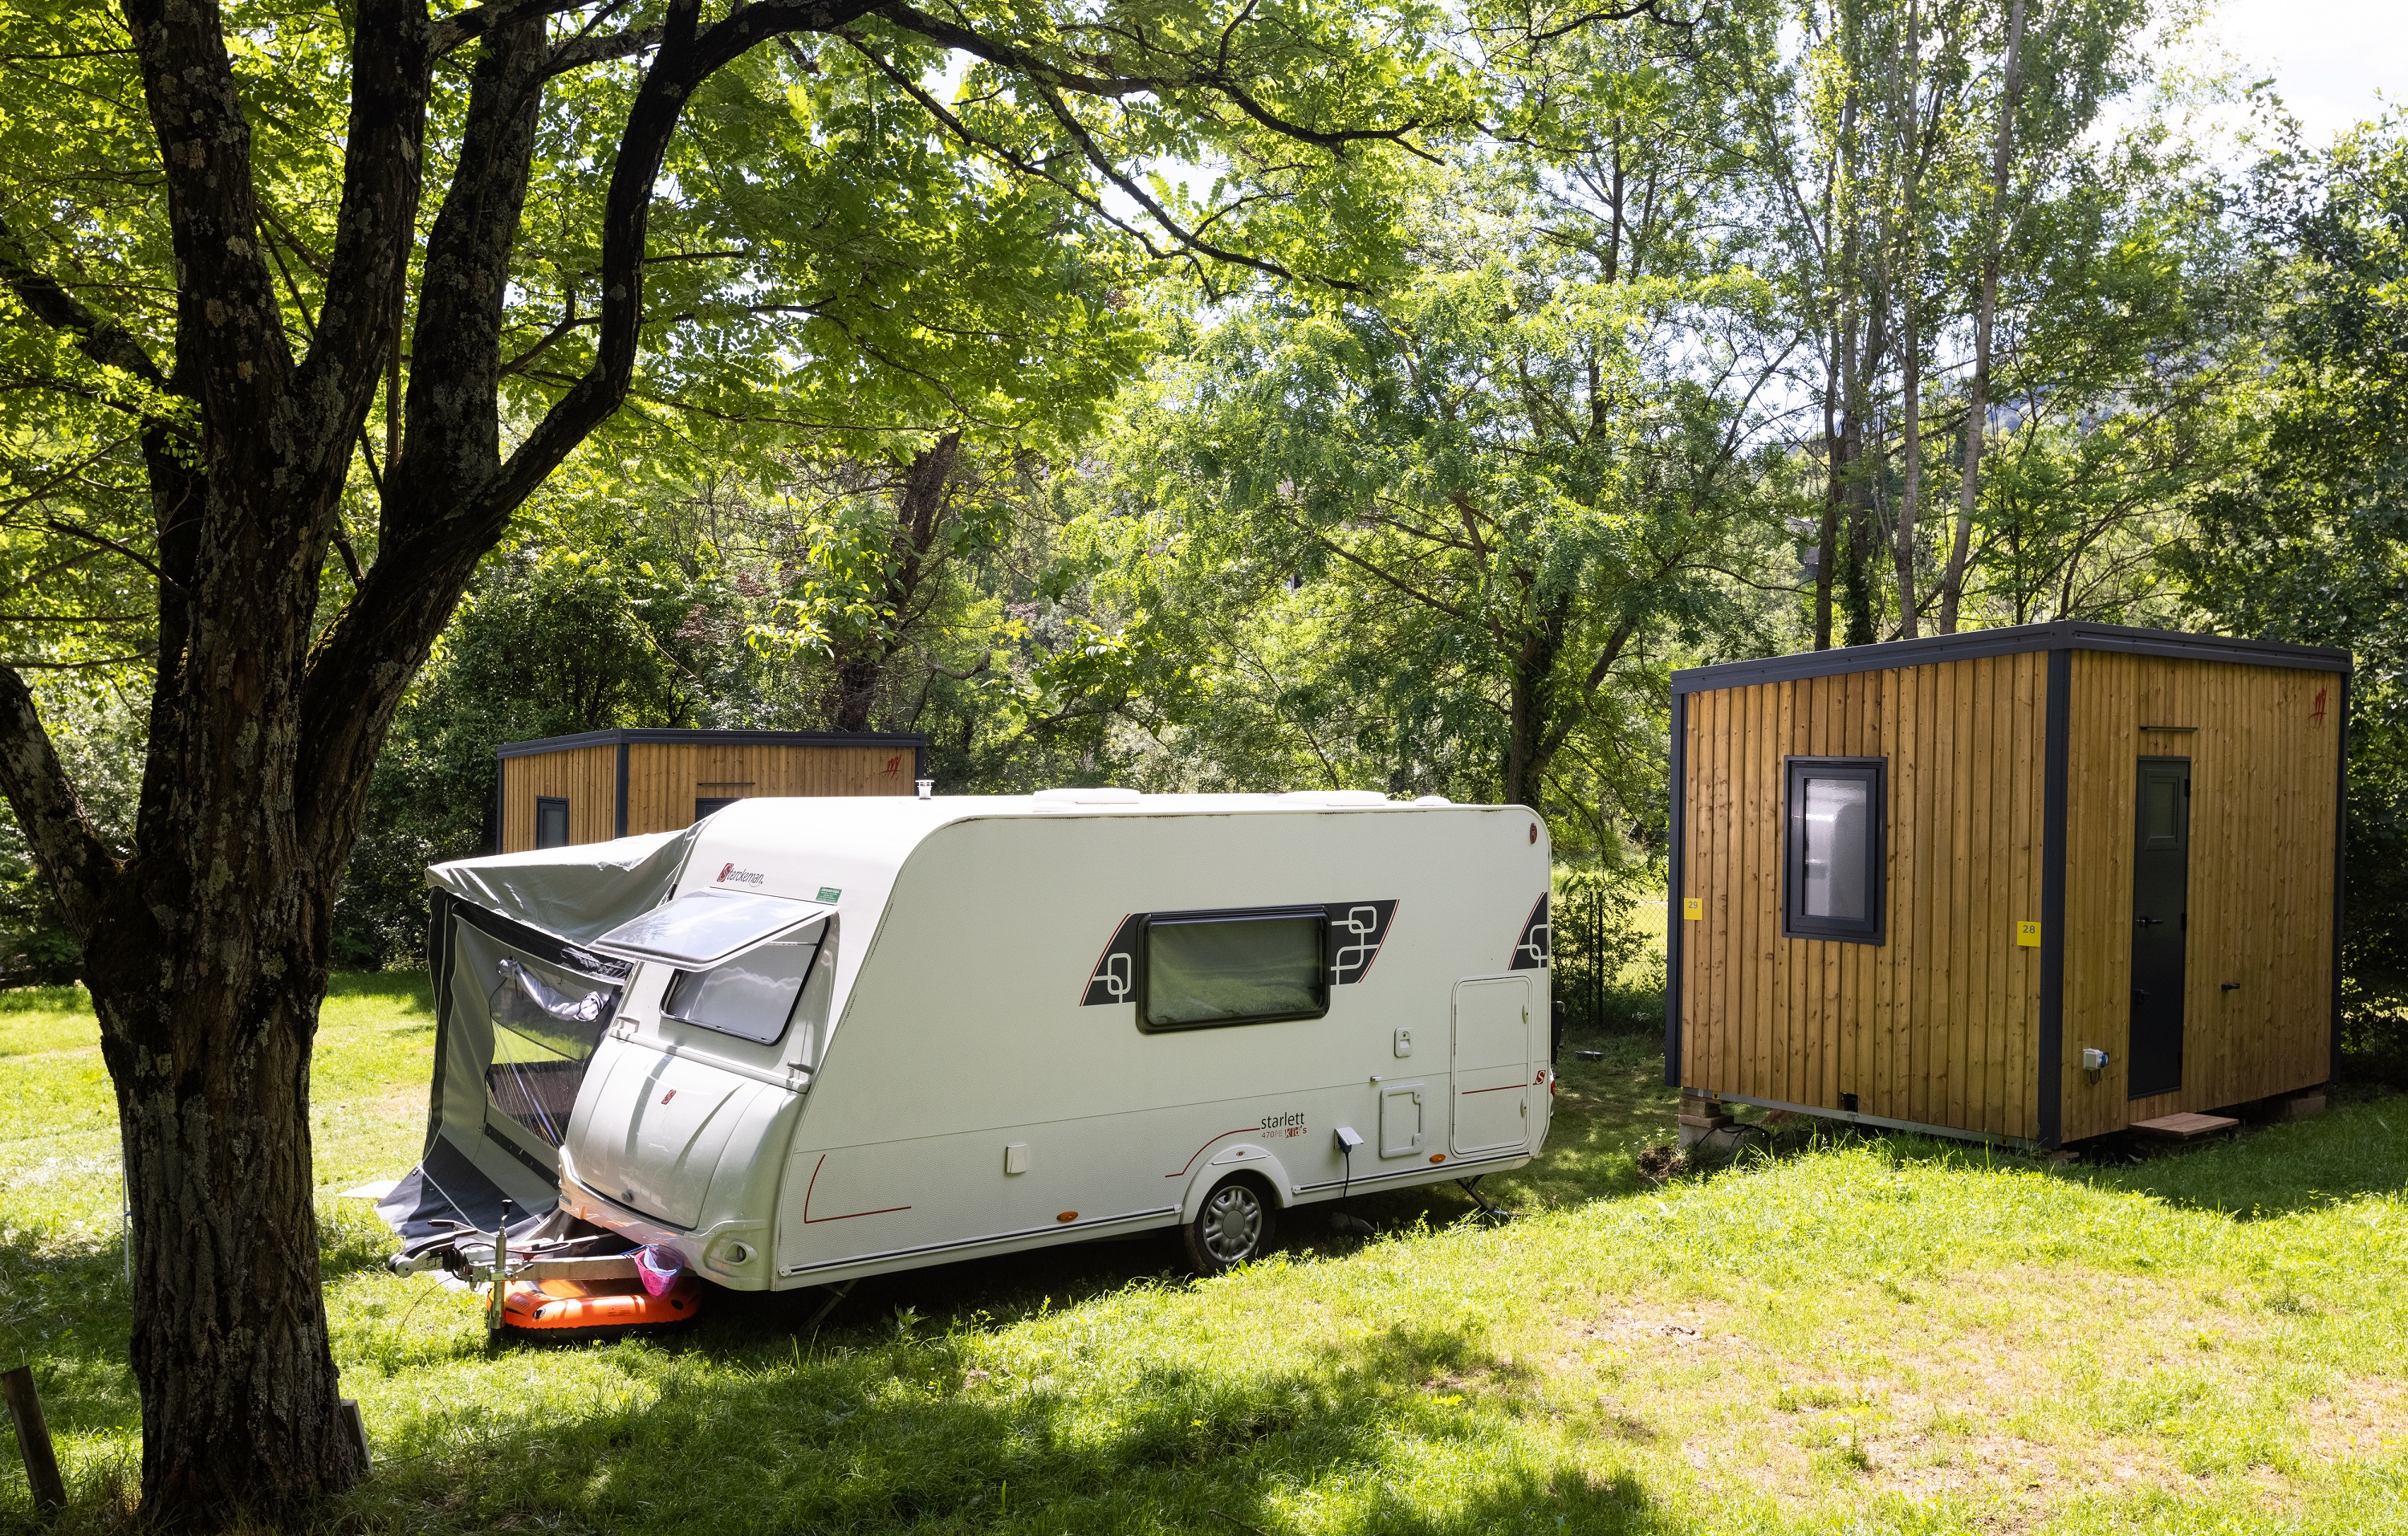 Stellplatz - Xxl Pitch With Private Sanitary Facilities And 10A Electricity For 2 People + 1 Vehicle - Ardèche Camping